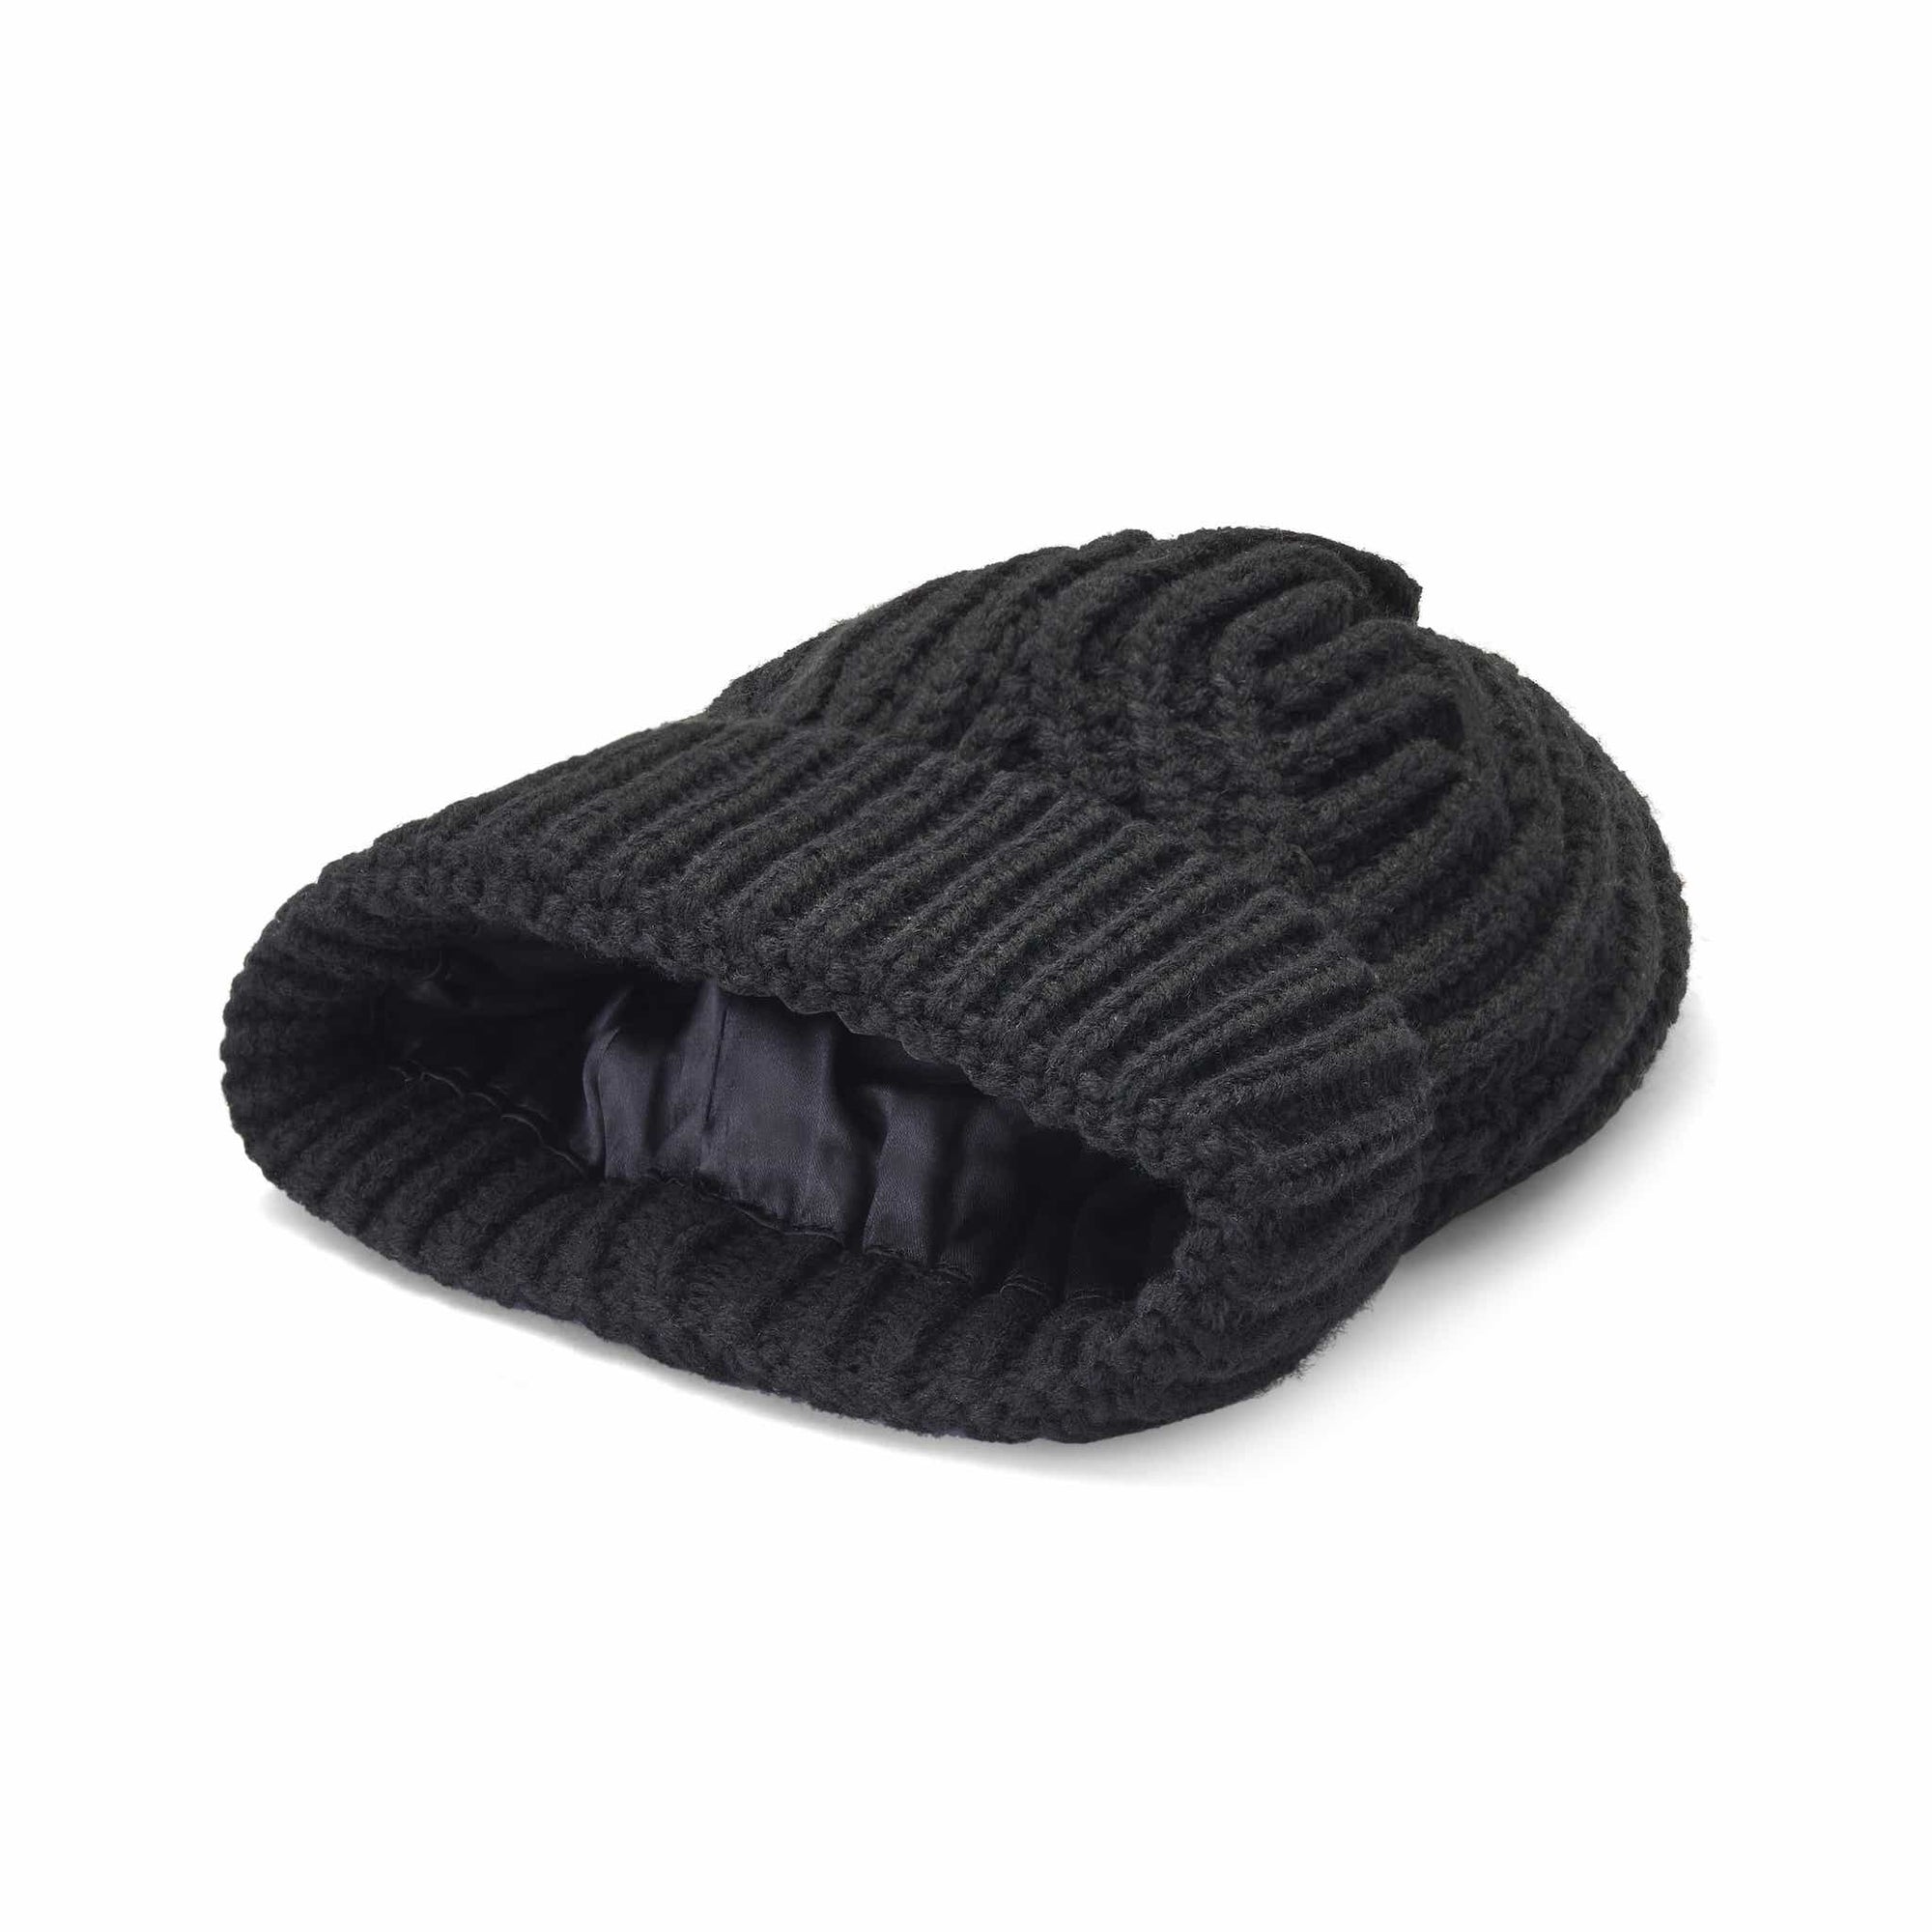 Only Curls Satin Lined Knitted Beanie Hat - Black - Only Curls